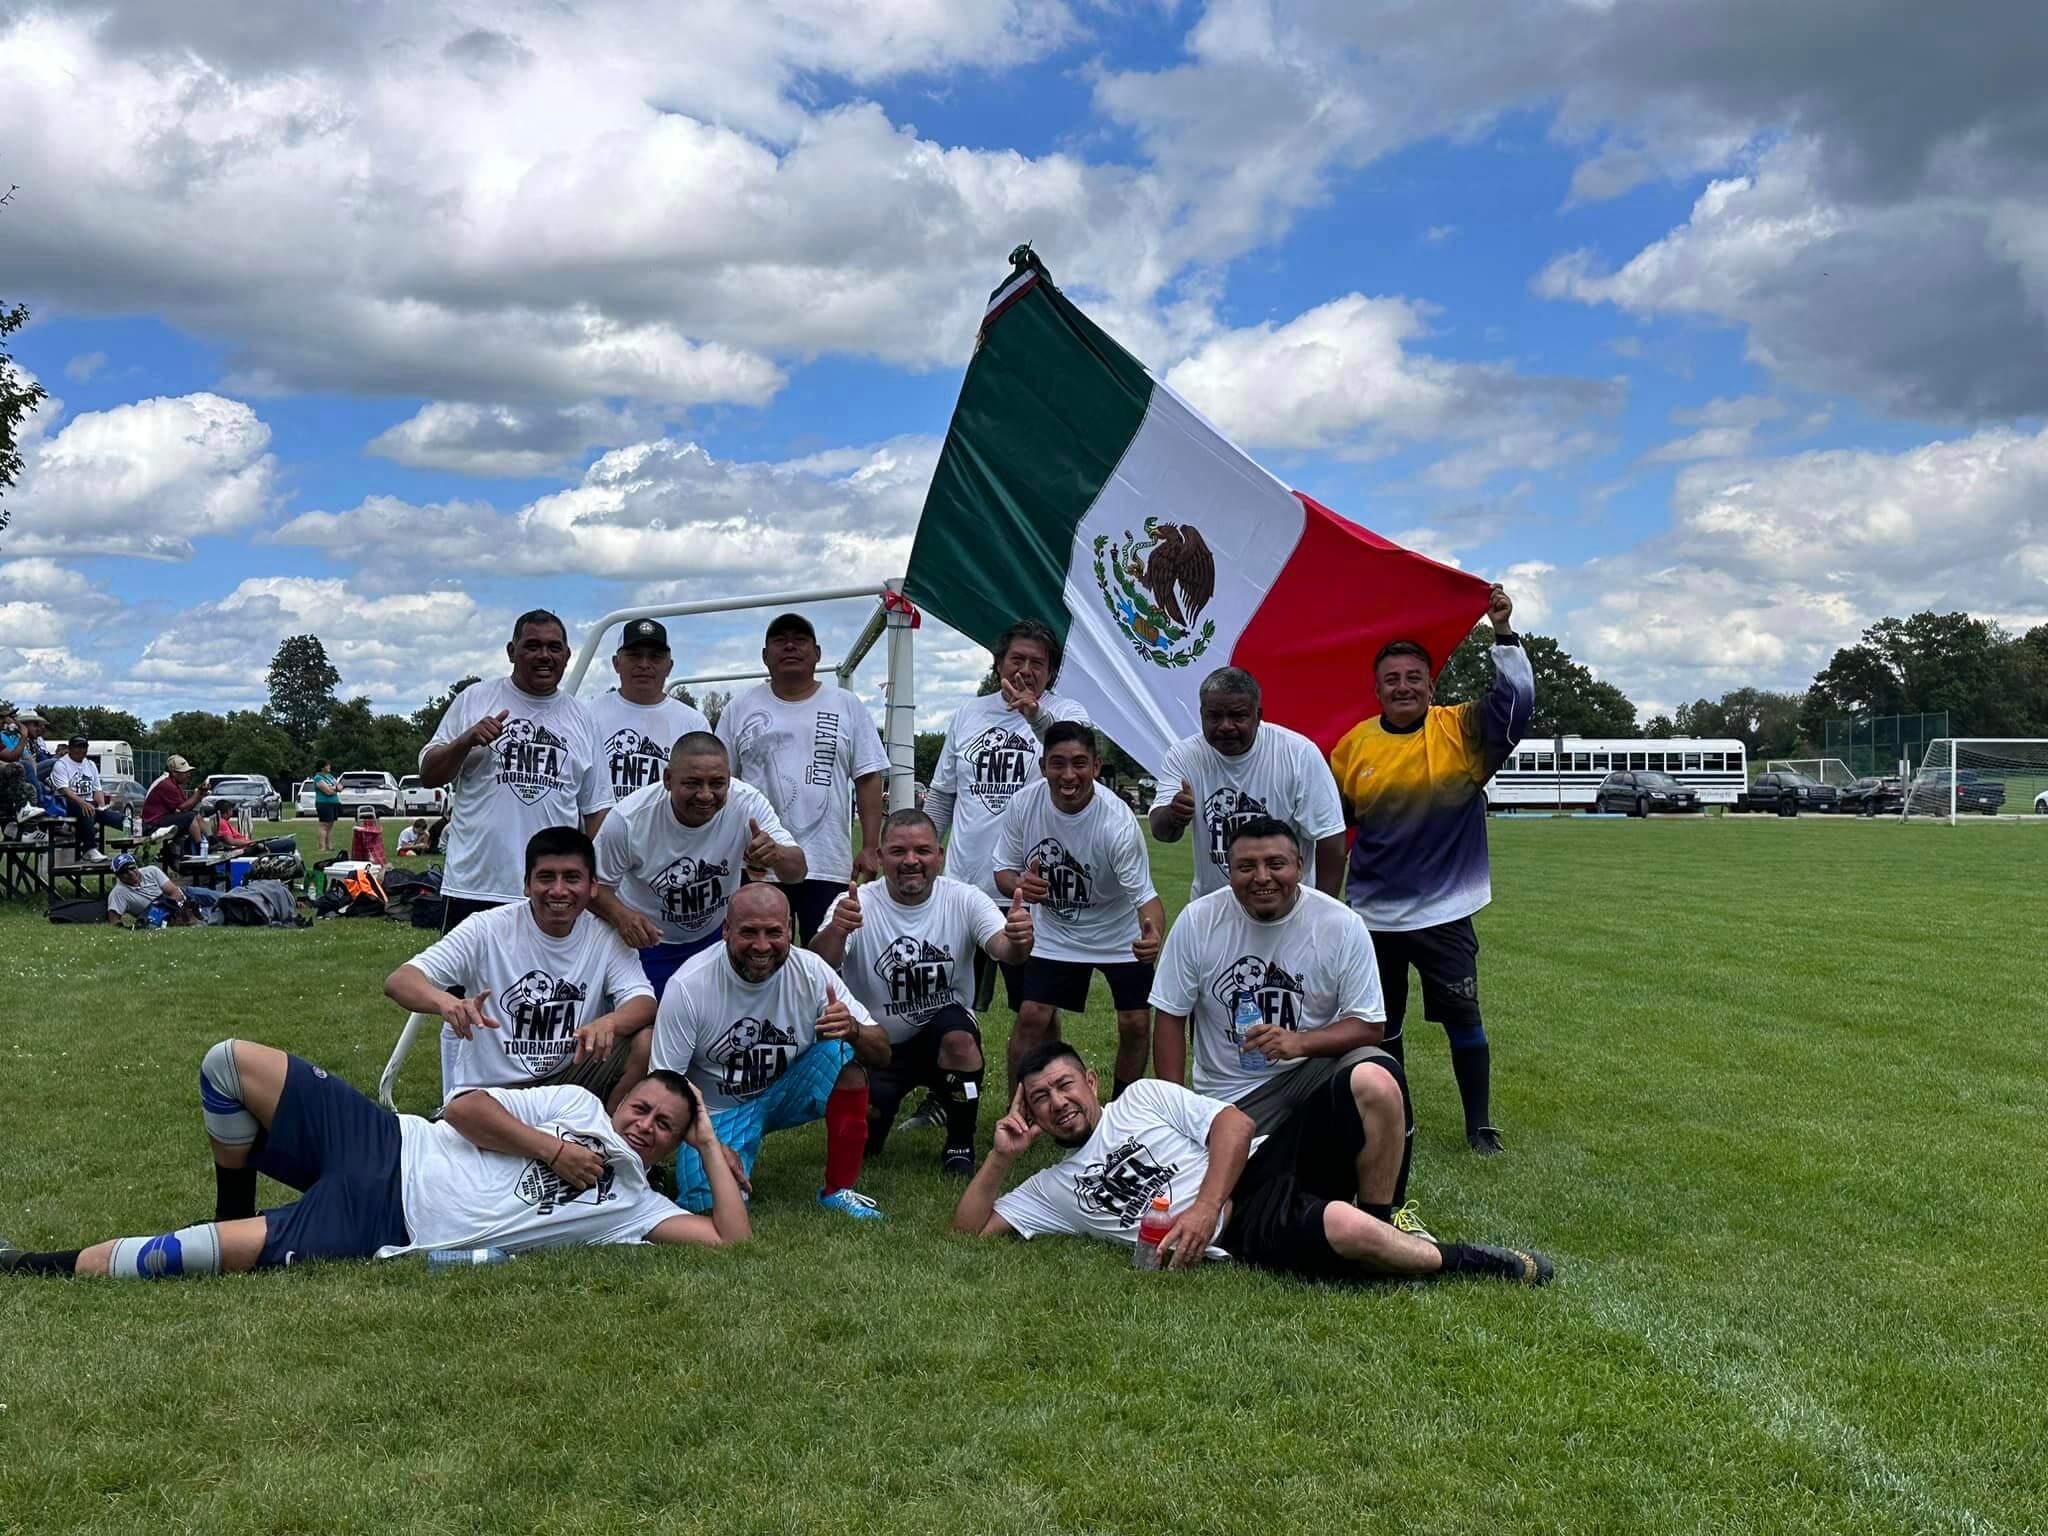 Soccer team holding Mexican flag